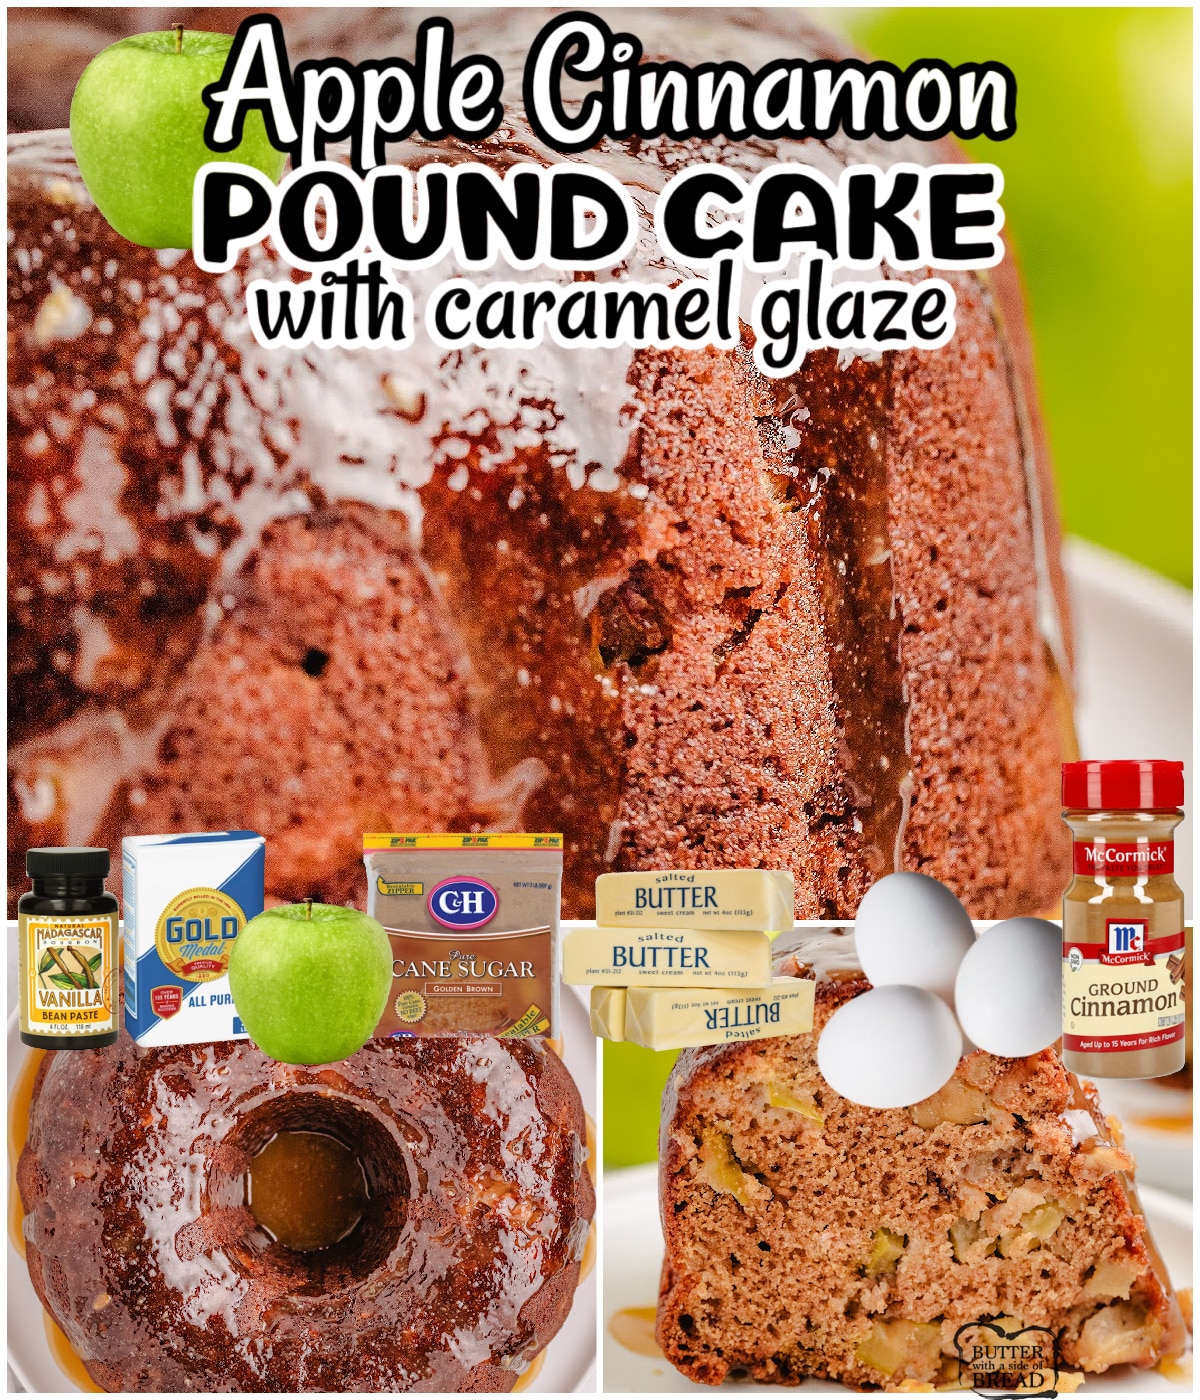 Apple Pound Cake with Caramel Glaze is a delicious dessert that combines buttery pound cake with fresh apple & a lovely brown sugar glaze!